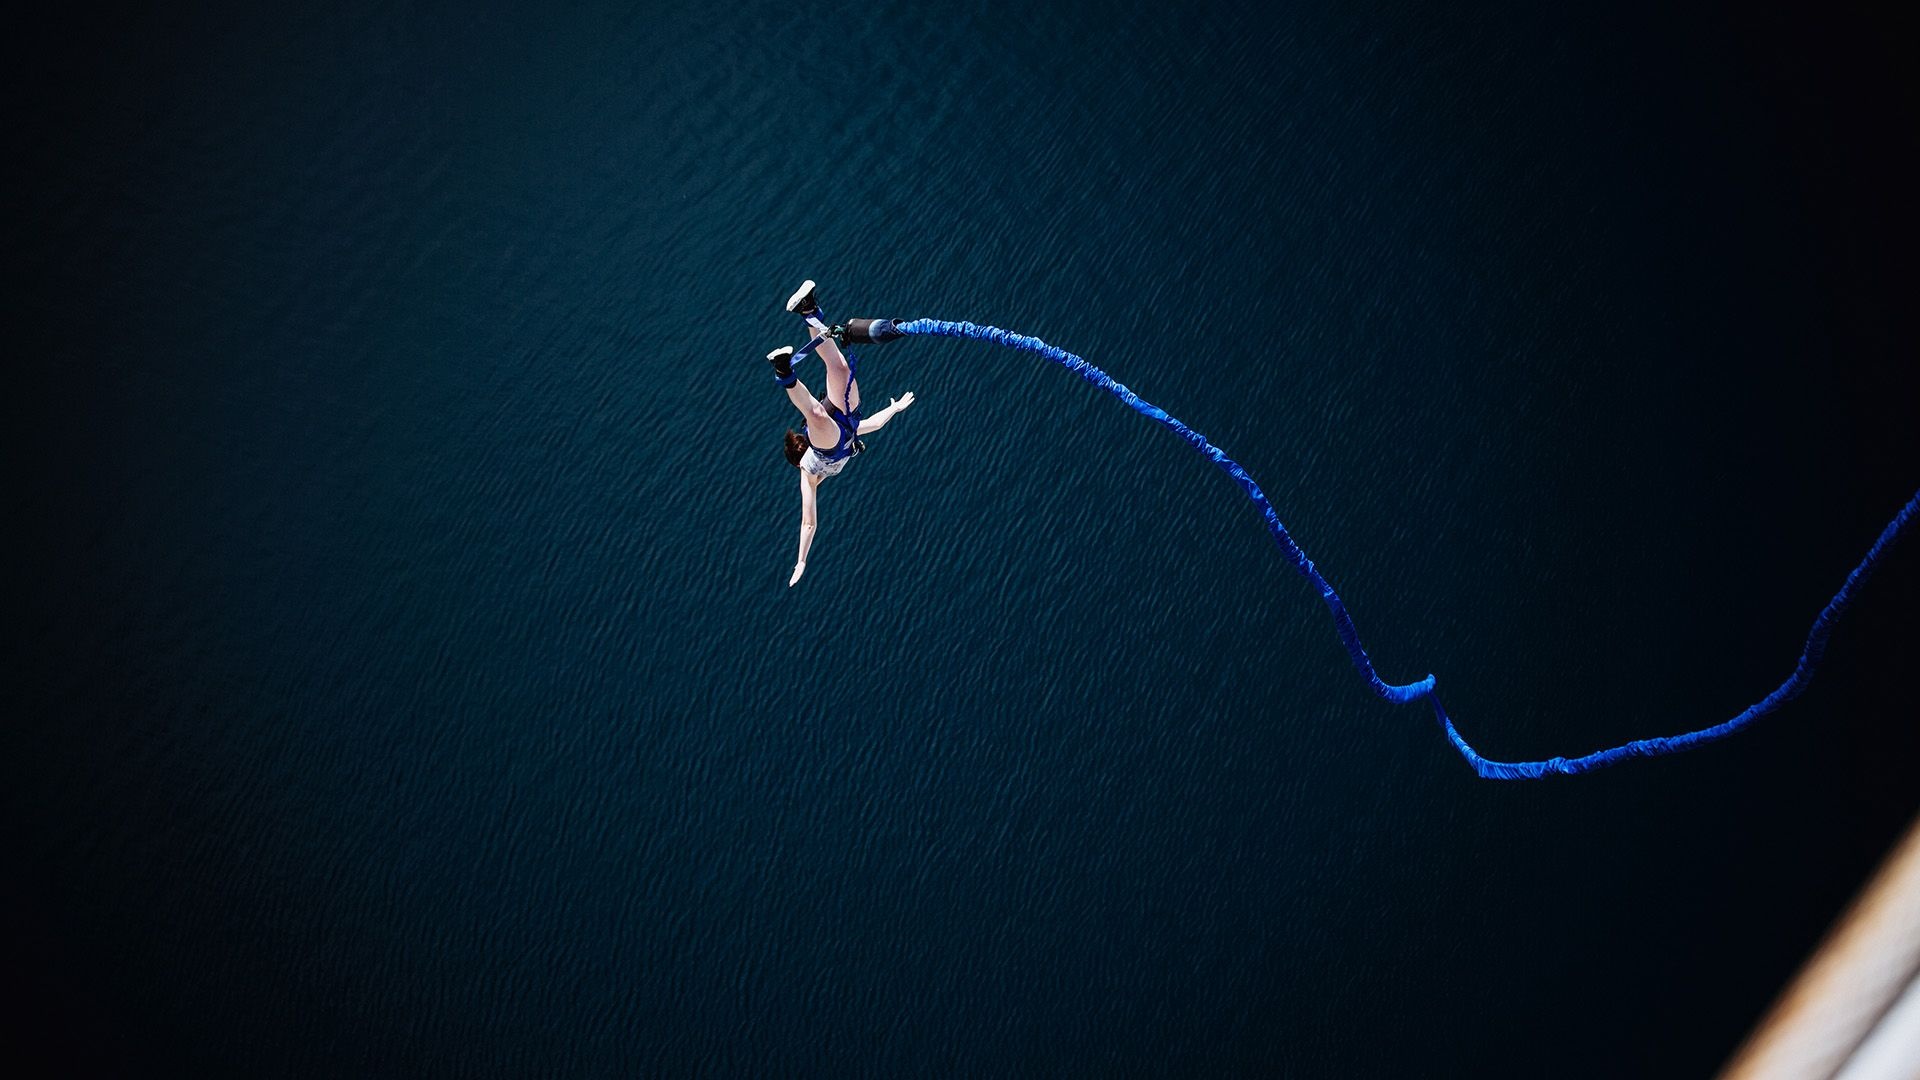 Bungee Jumping: An adrenaline lover connected to a blue ultra-durable elastic rope falls from a helicopter. 1920x1080 Full HD Wallpaper.